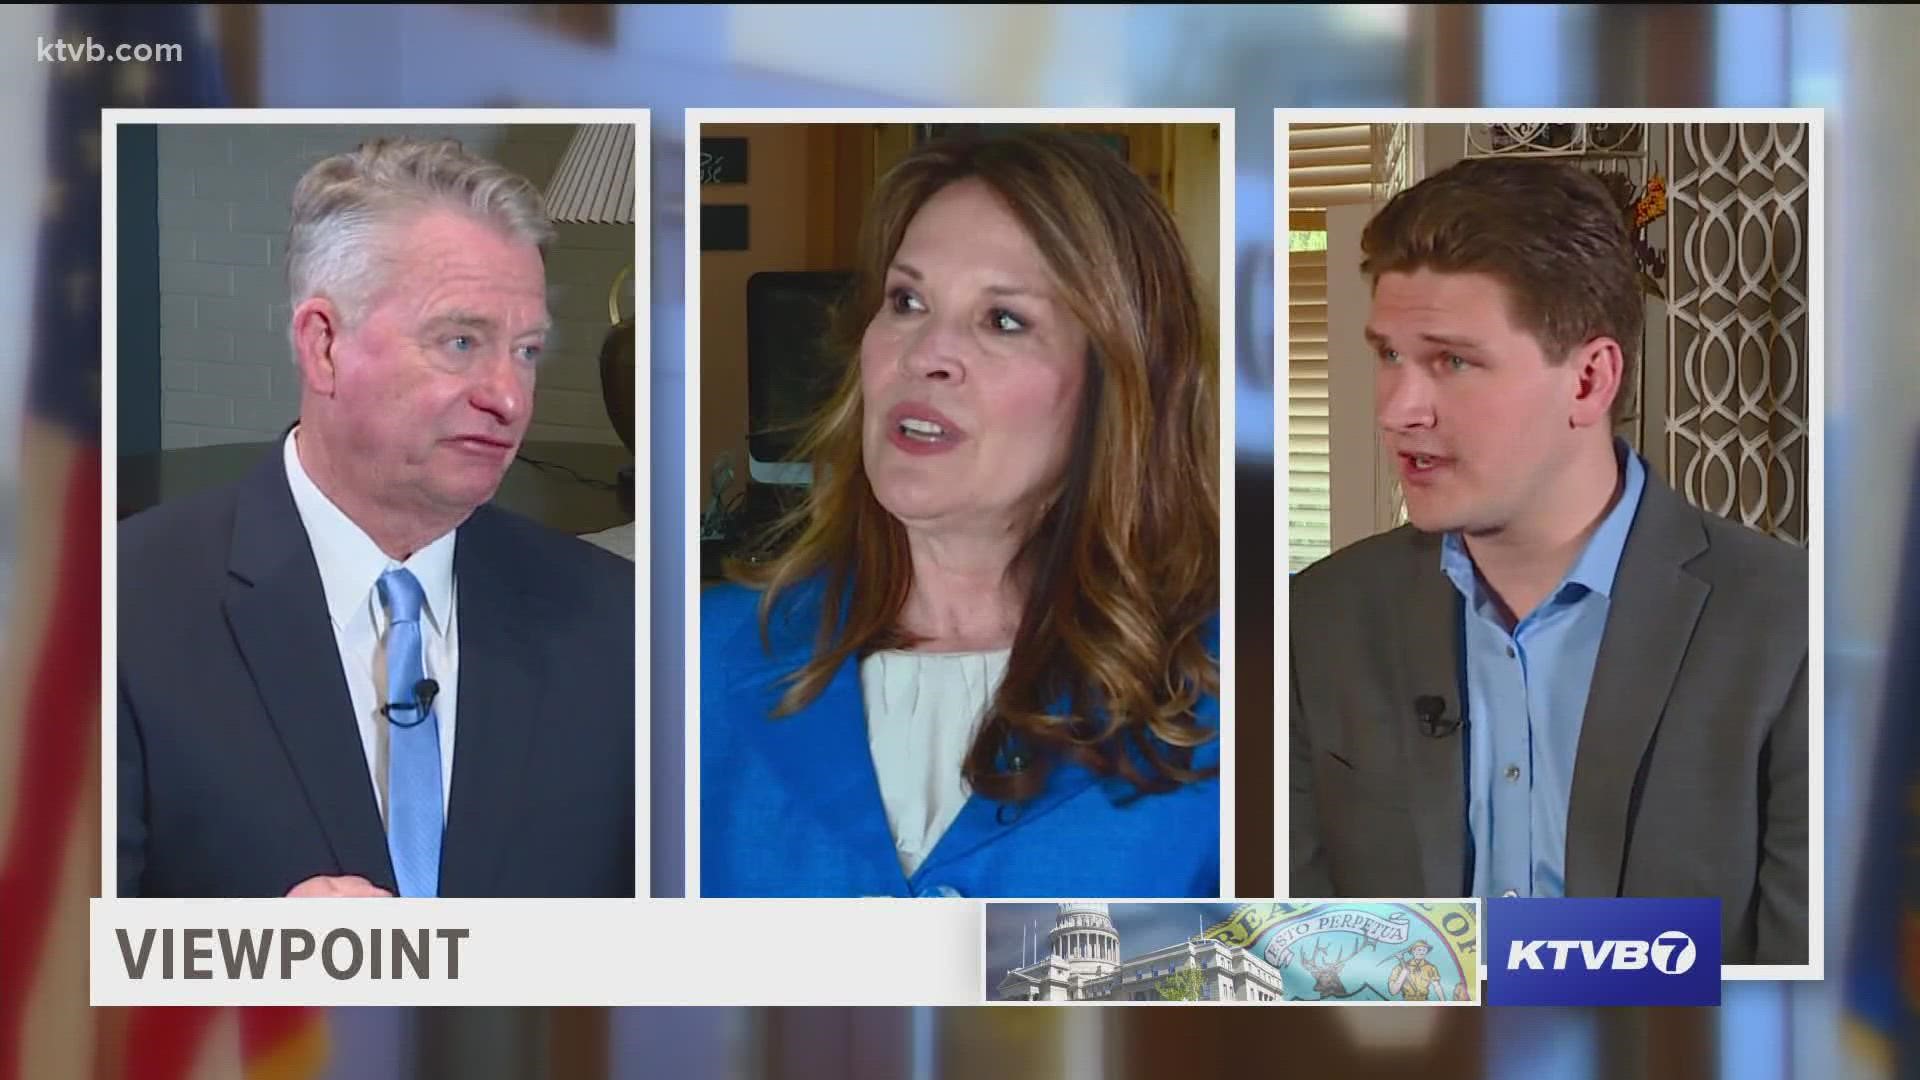 This edition of Viewpoint focuses on the race for Idaho governor, specifically the three candidates running for the Republican nomination in the 2022 Idaho Primary.